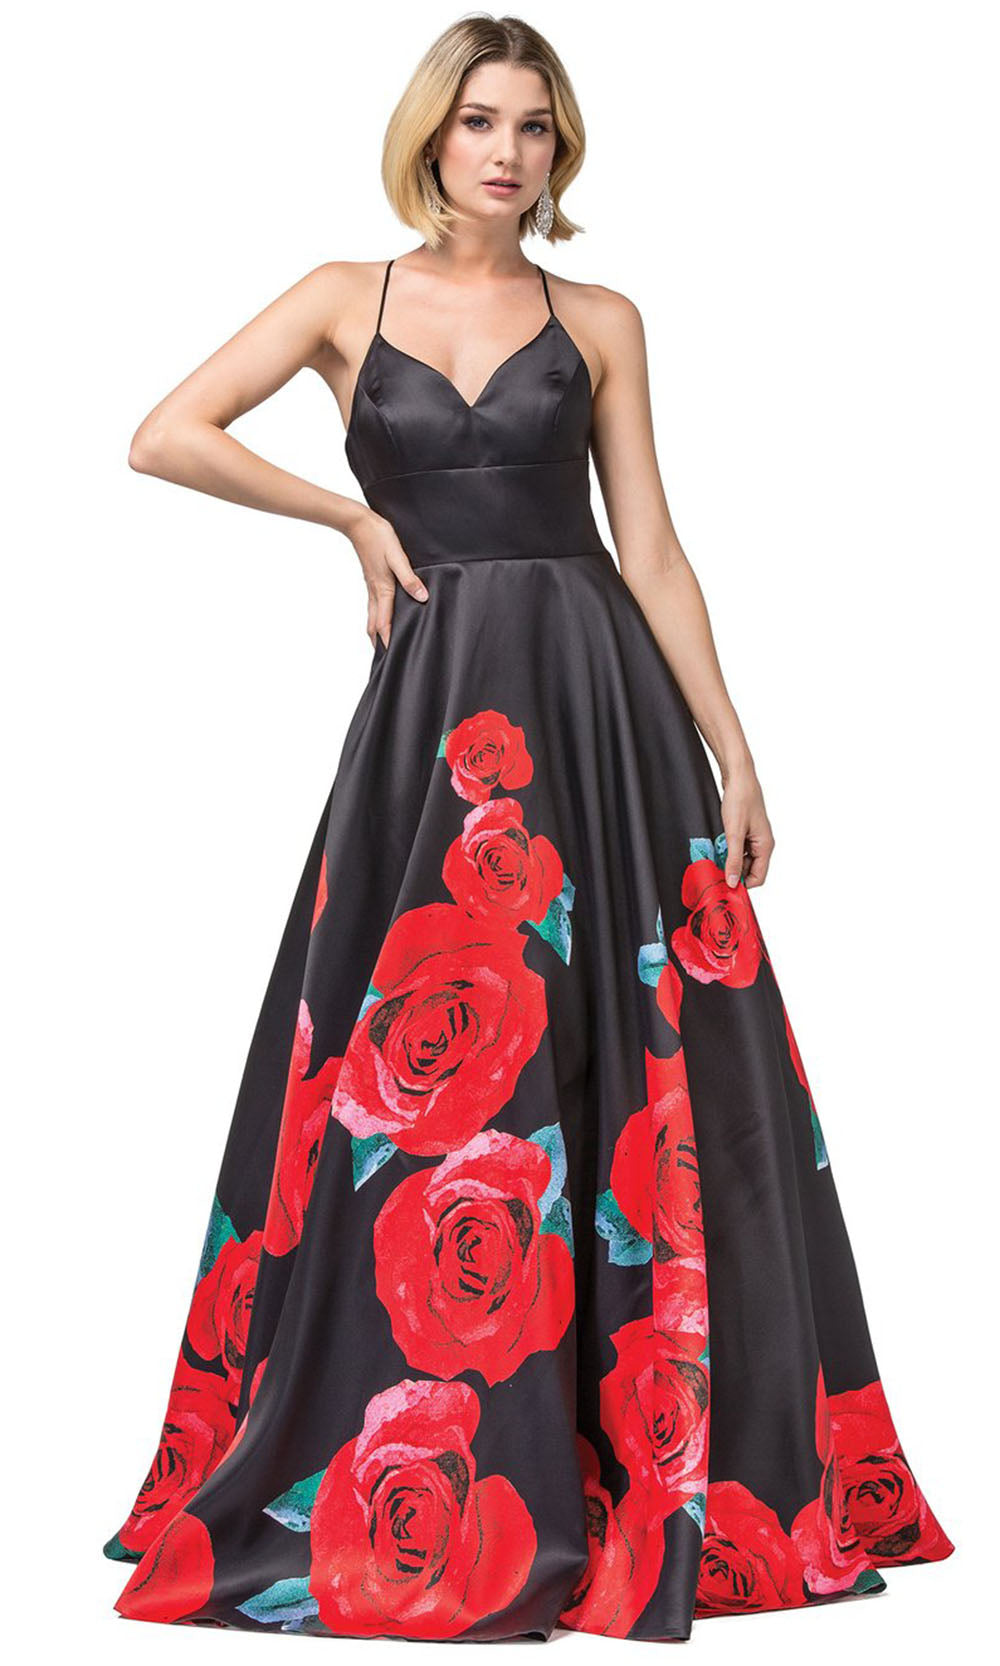 Dancing Queen - 2843 Floral Printed Taffeta Long Gown In Black and Red